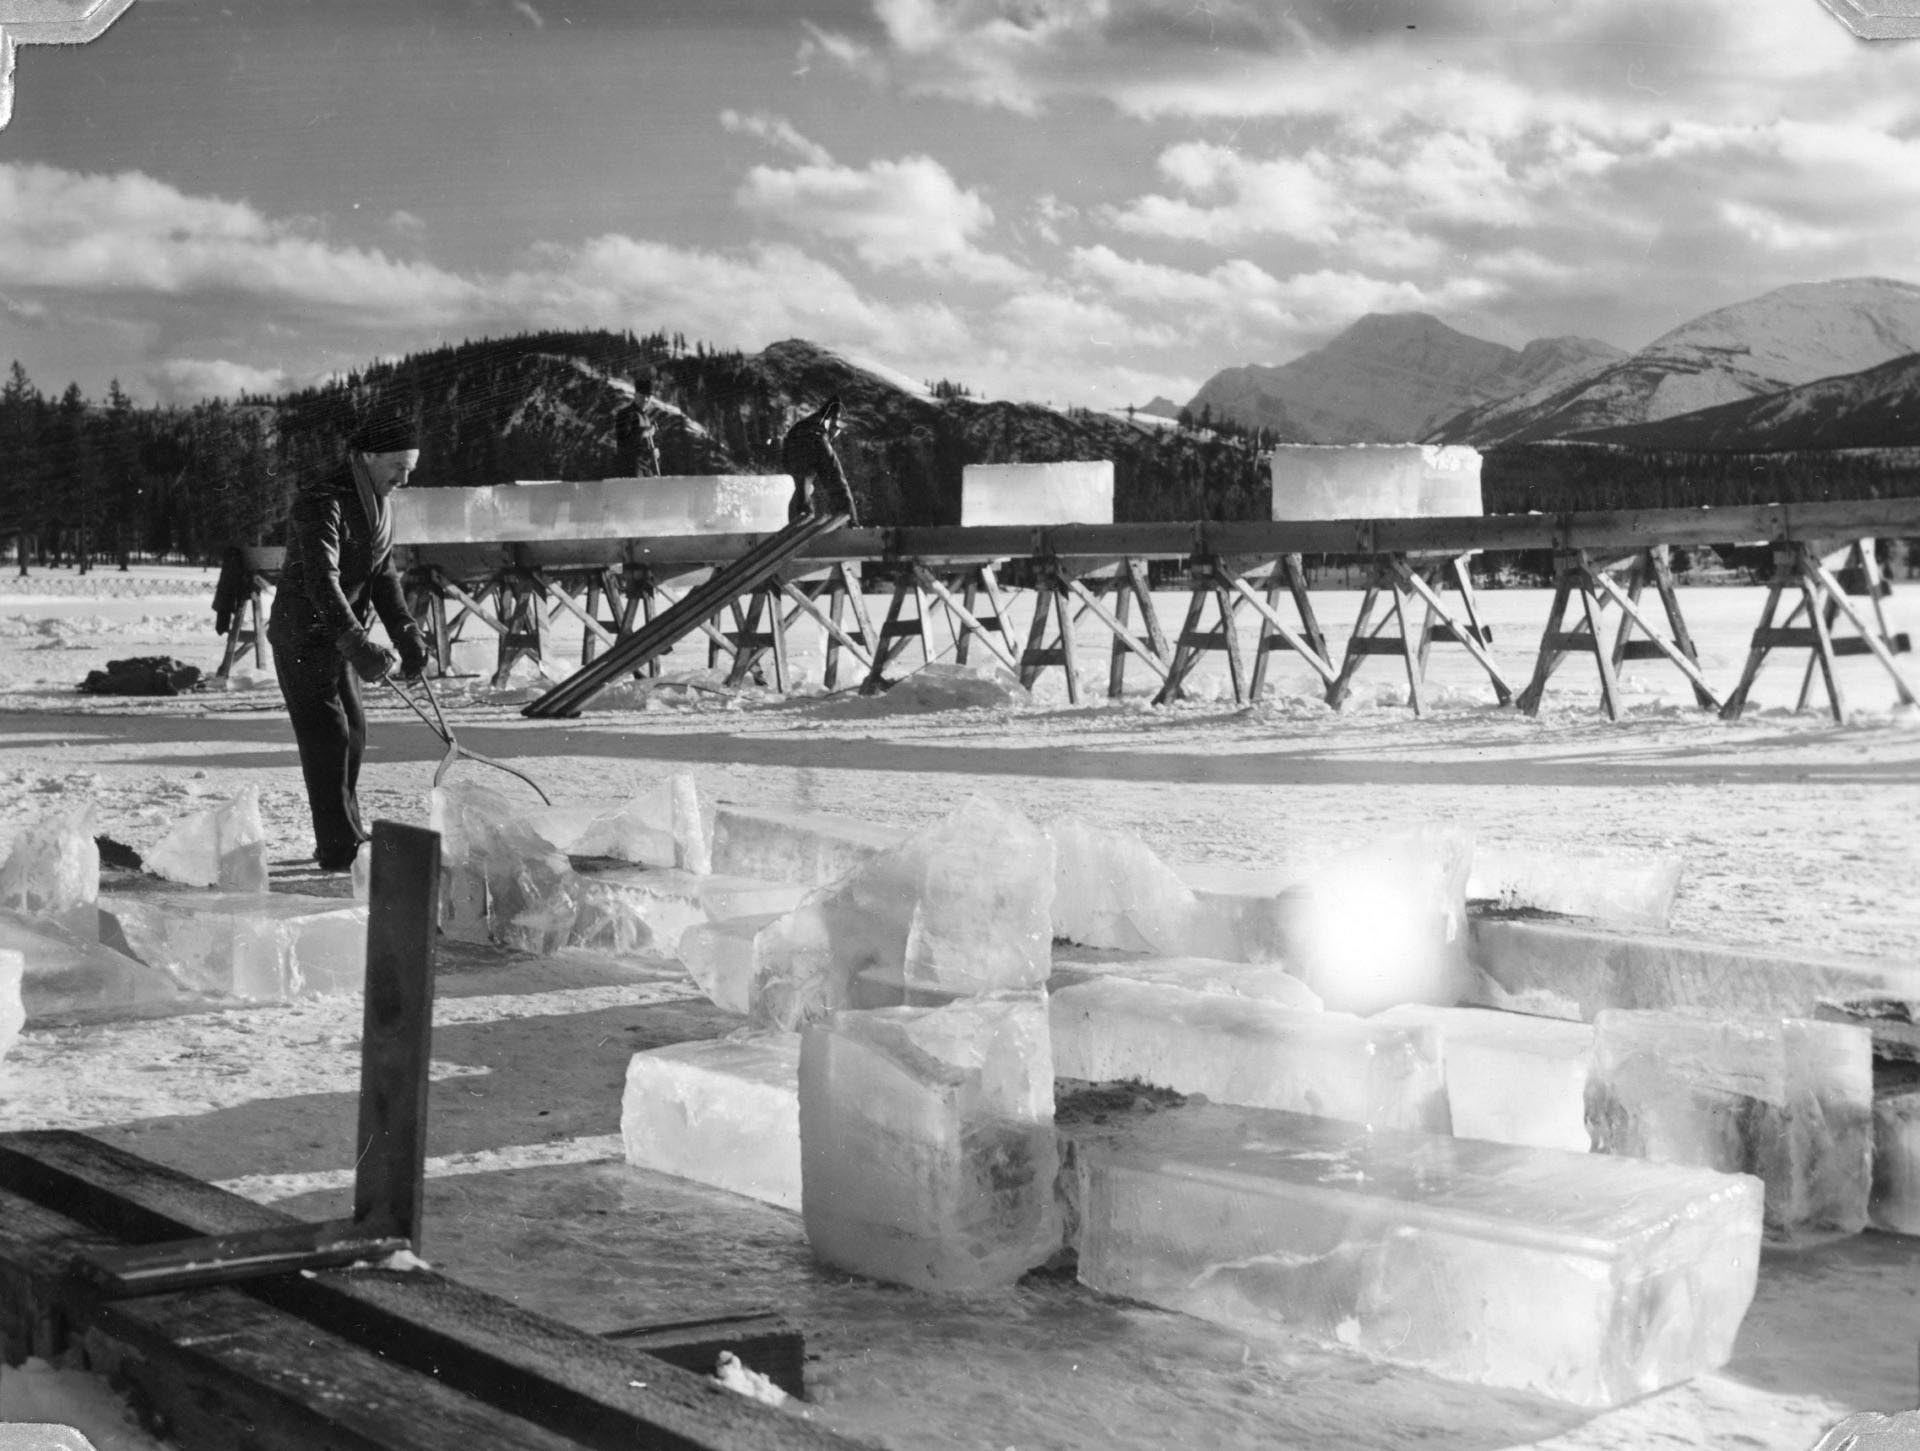 A crew of 15 men spent two months working to build a model aircraft carrier using “pykrete,” a mixture of ice and wood pulp, on Lake Patricia, Ontario, Canada in 1943. The construction effort, part of Project Habakkuk, was later abandoned.